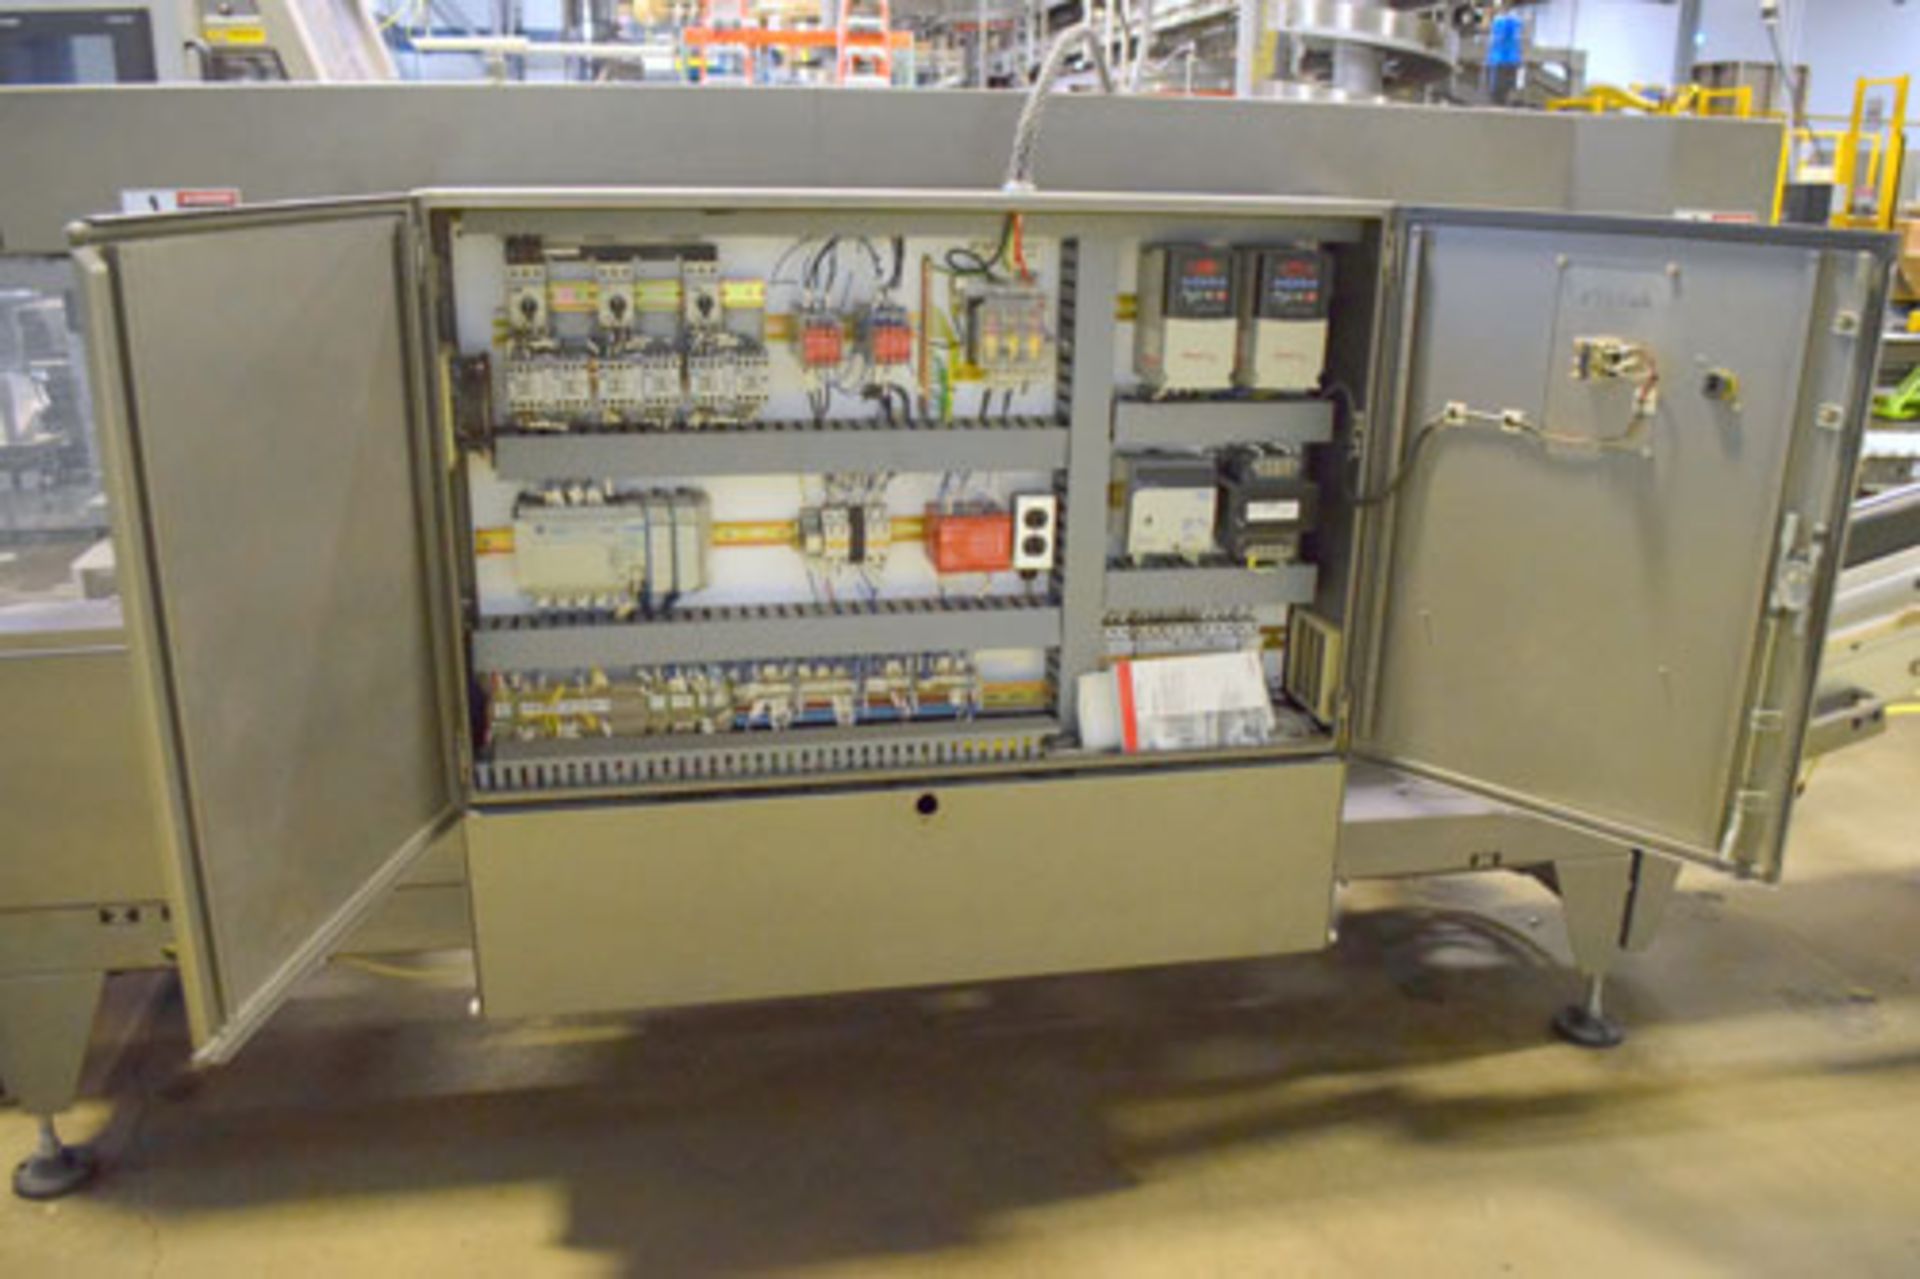 BluePrint Automation Robotic Top Loader, Serial# 597, Job# 13129, Built 2002. Includes infeed pro - Image 41 of 43